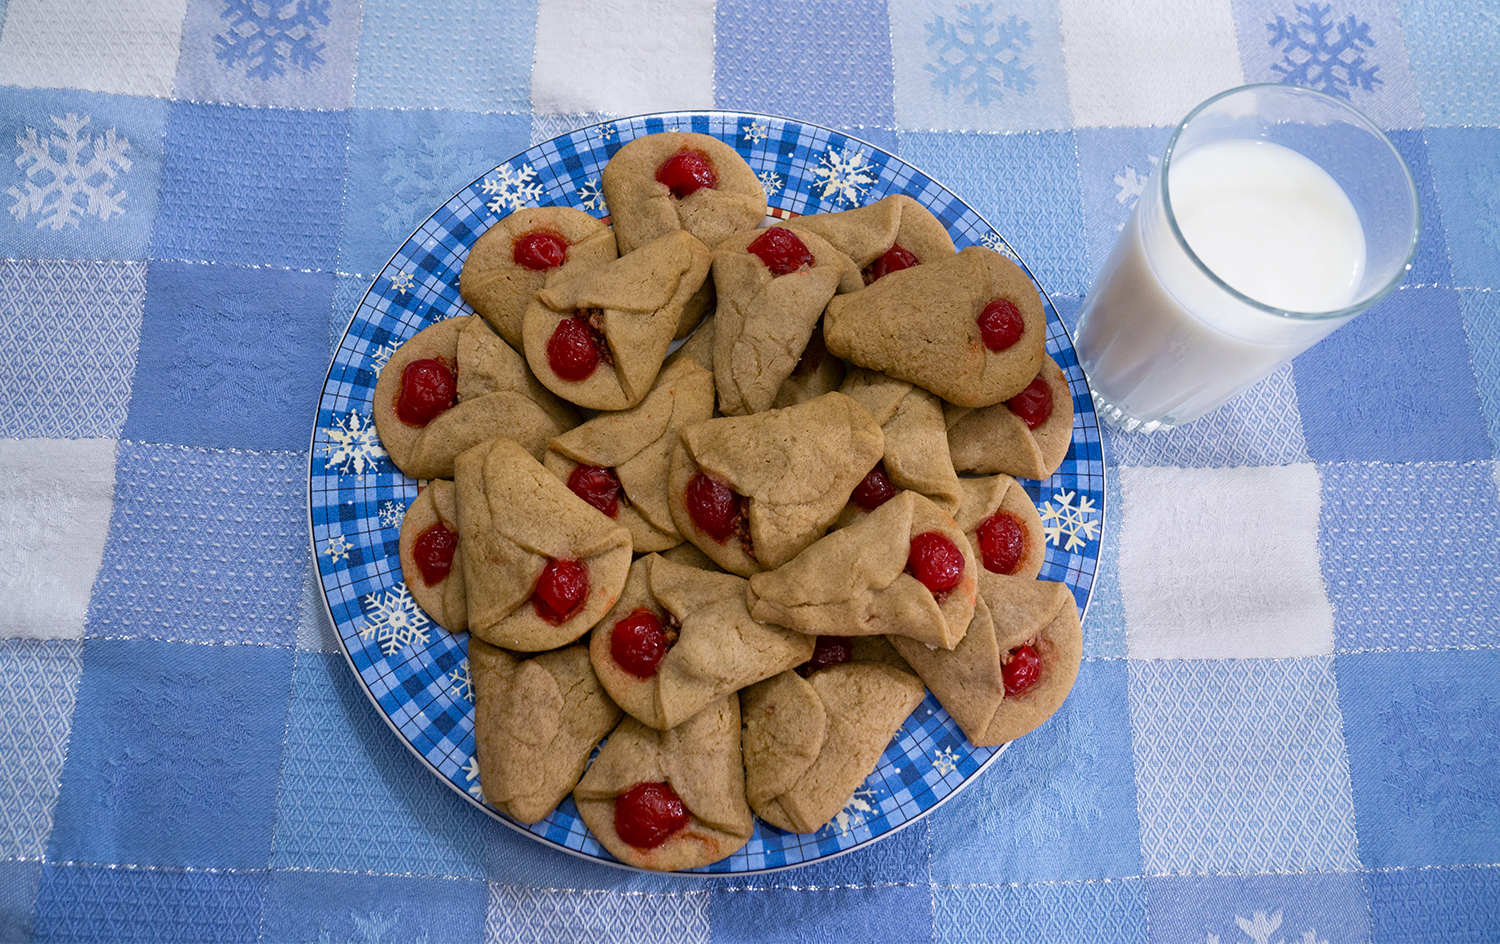 Plate full of cookies with glass of milk